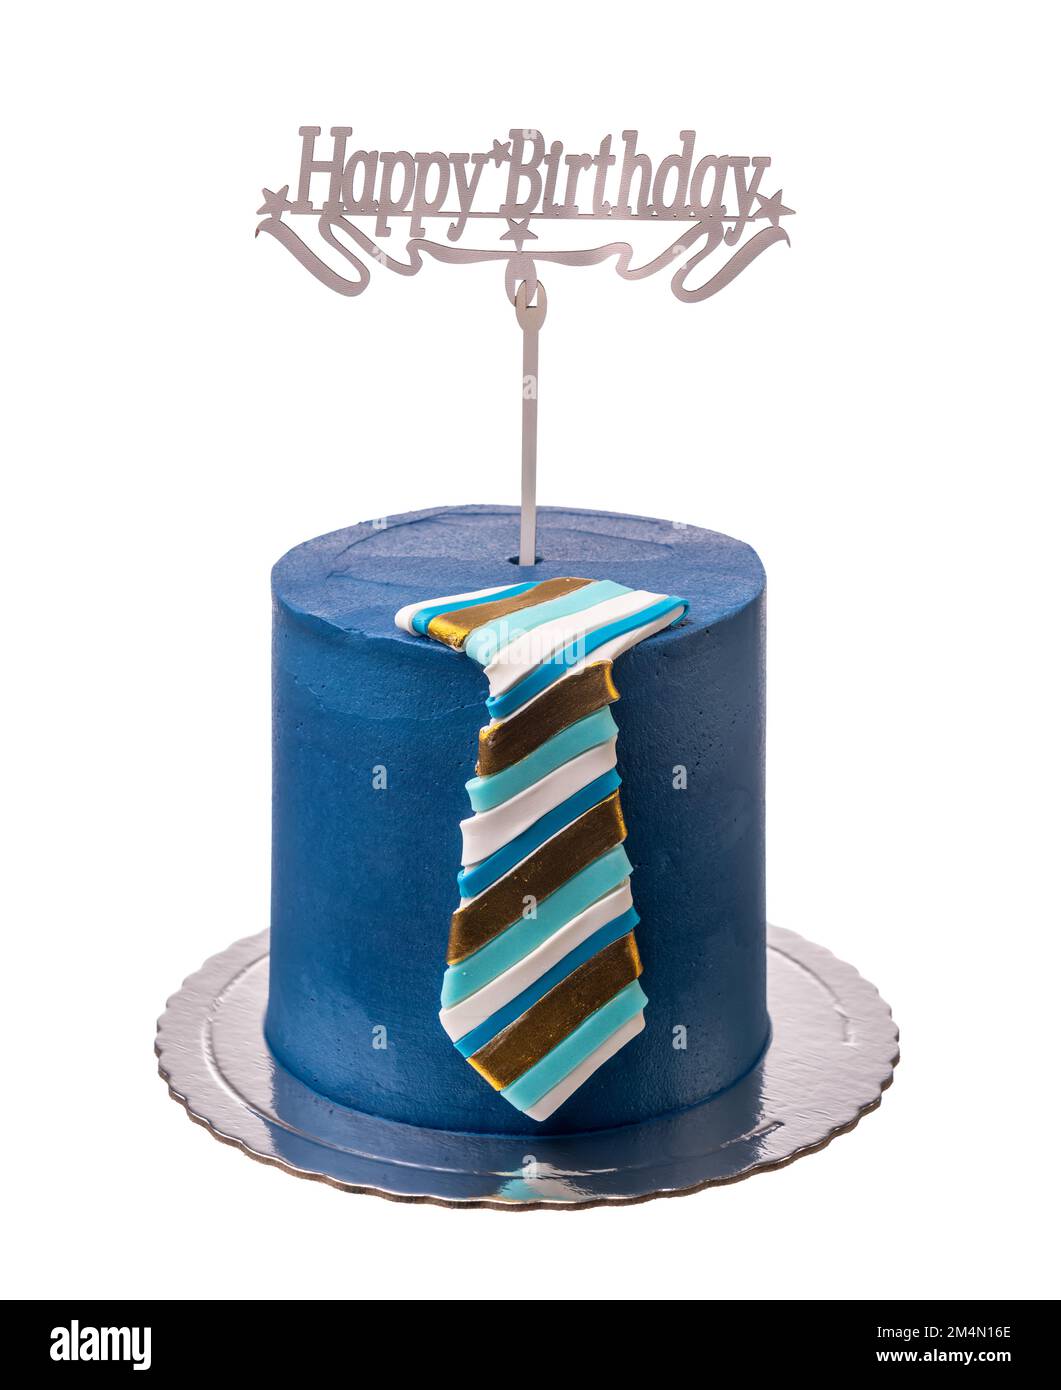 Blue cake with a tie for a holiday for a man. On a white background. Close-up. Stock Photo